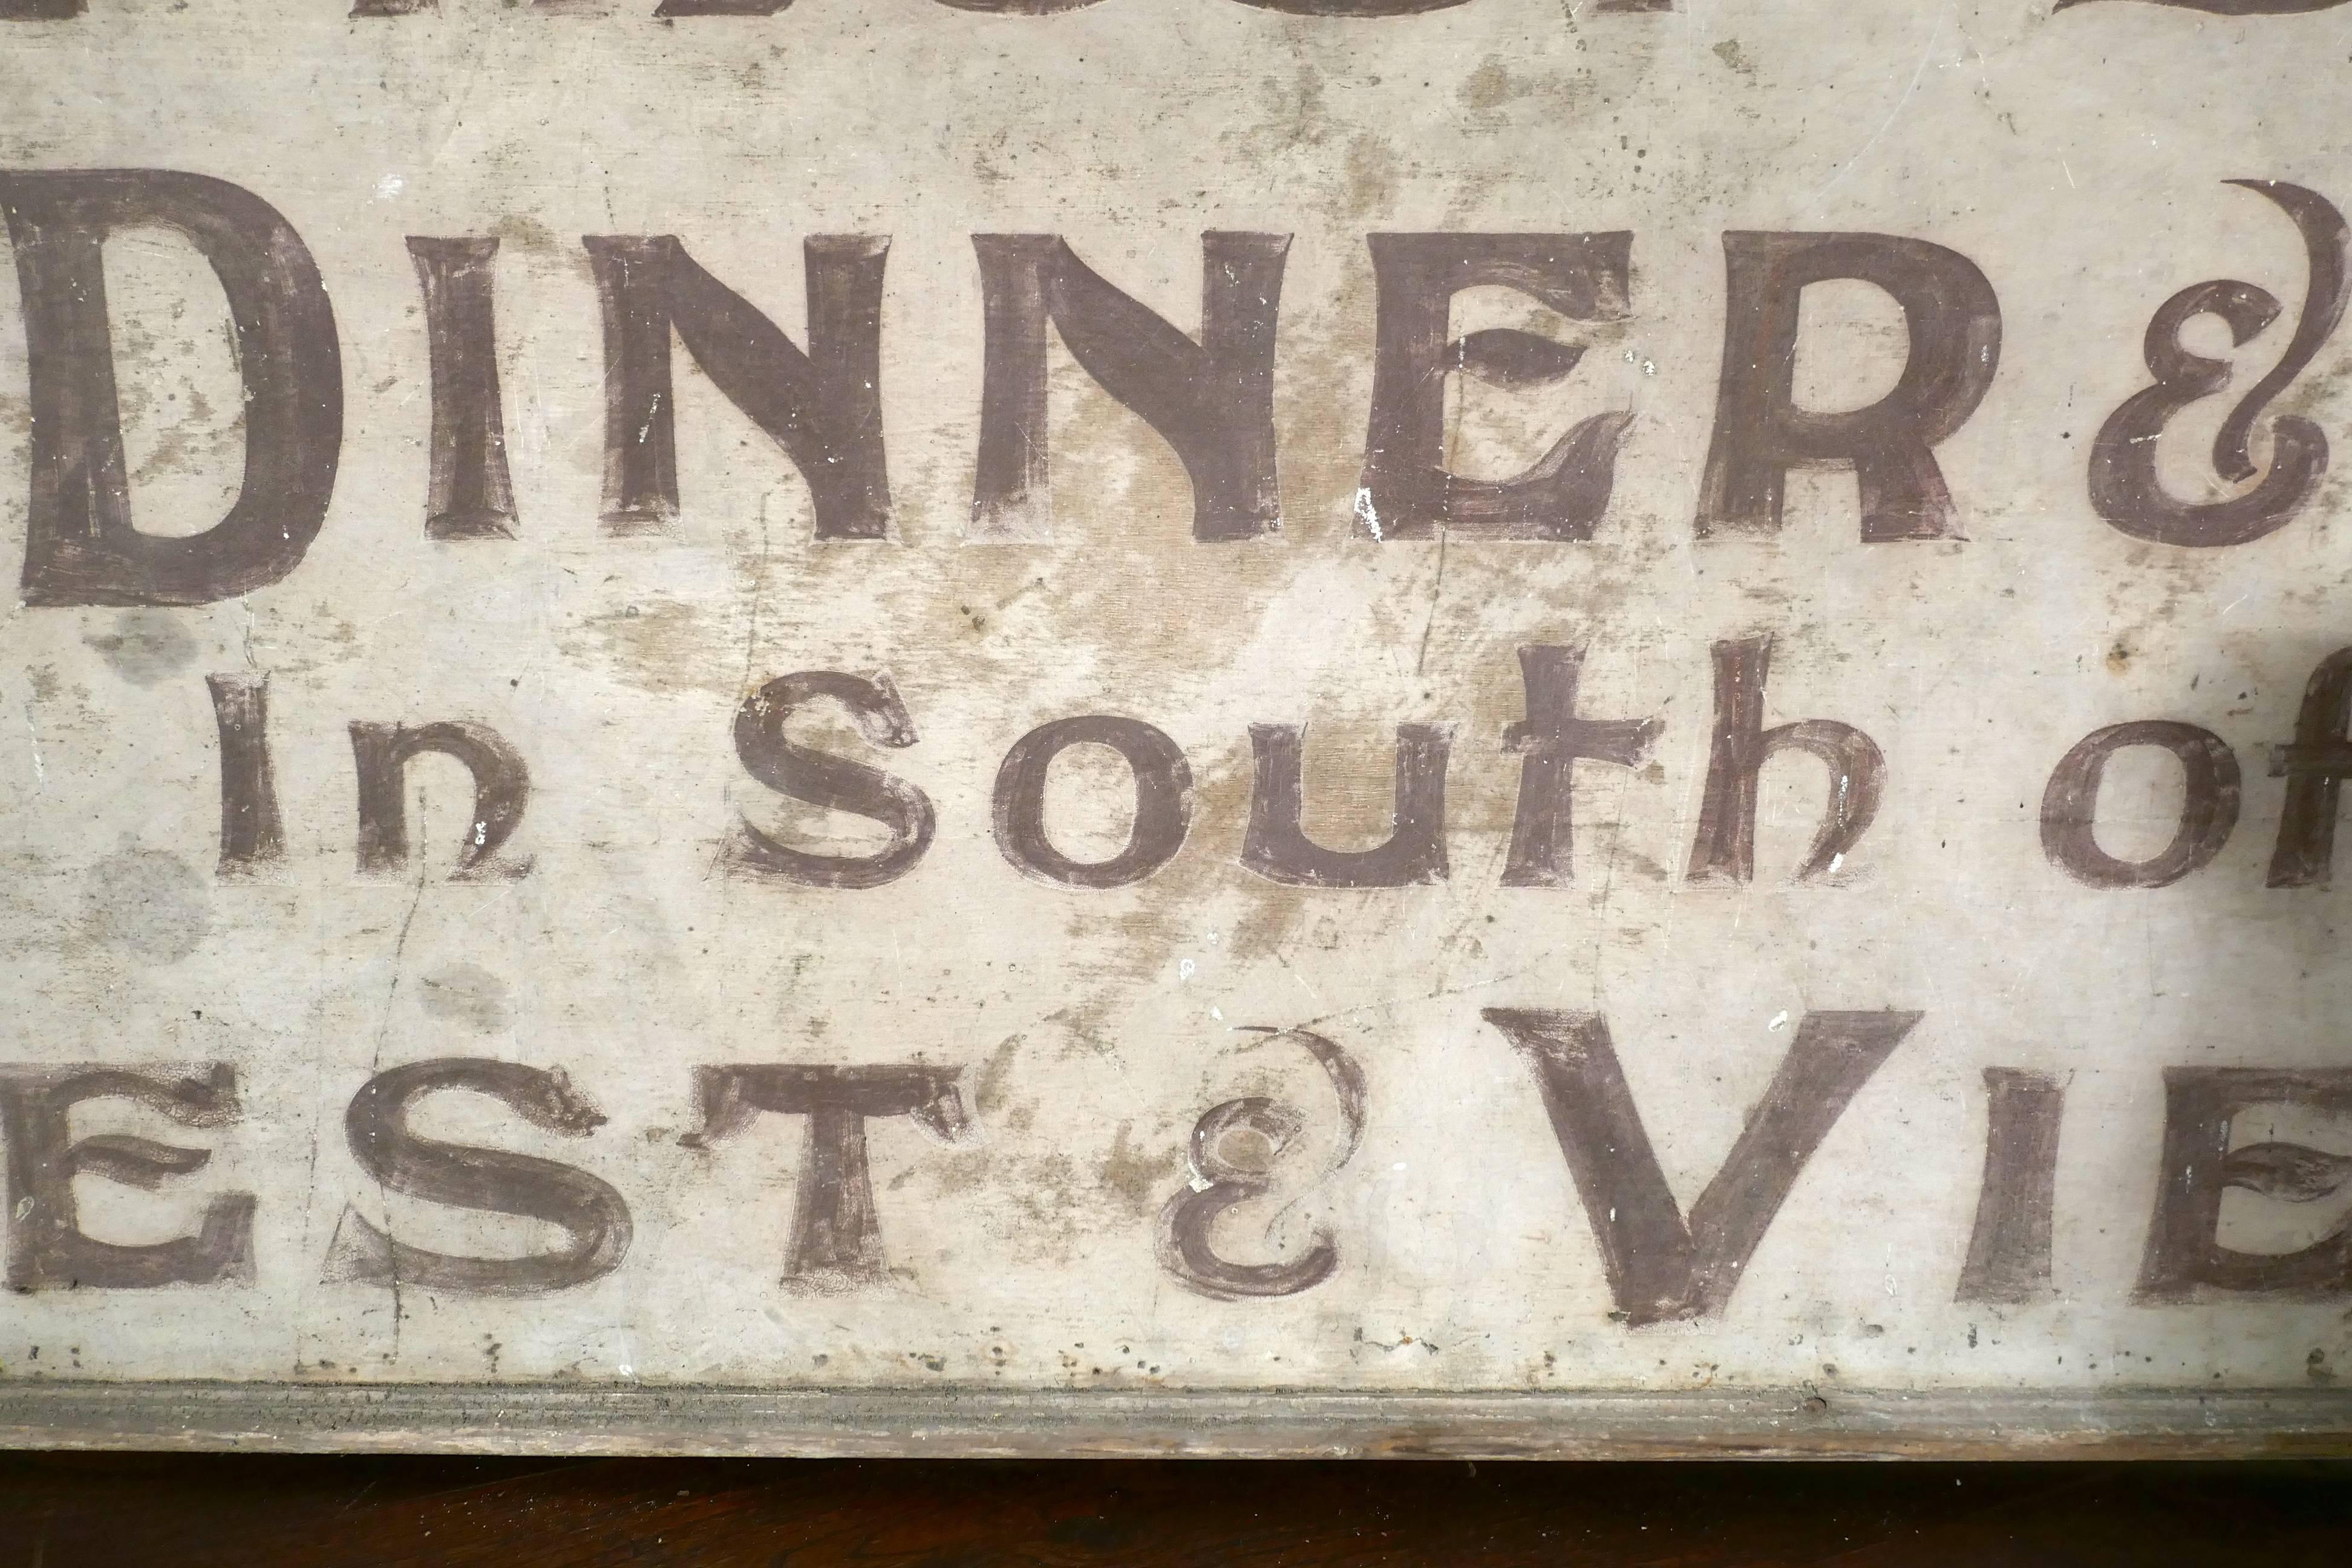 Large department store shop trade sign

This great is a piece of social history, dating from the 1930s the sign was made on a framed wooden board advertising all manner of china from the domestic to the tourist collectables all for sale in the